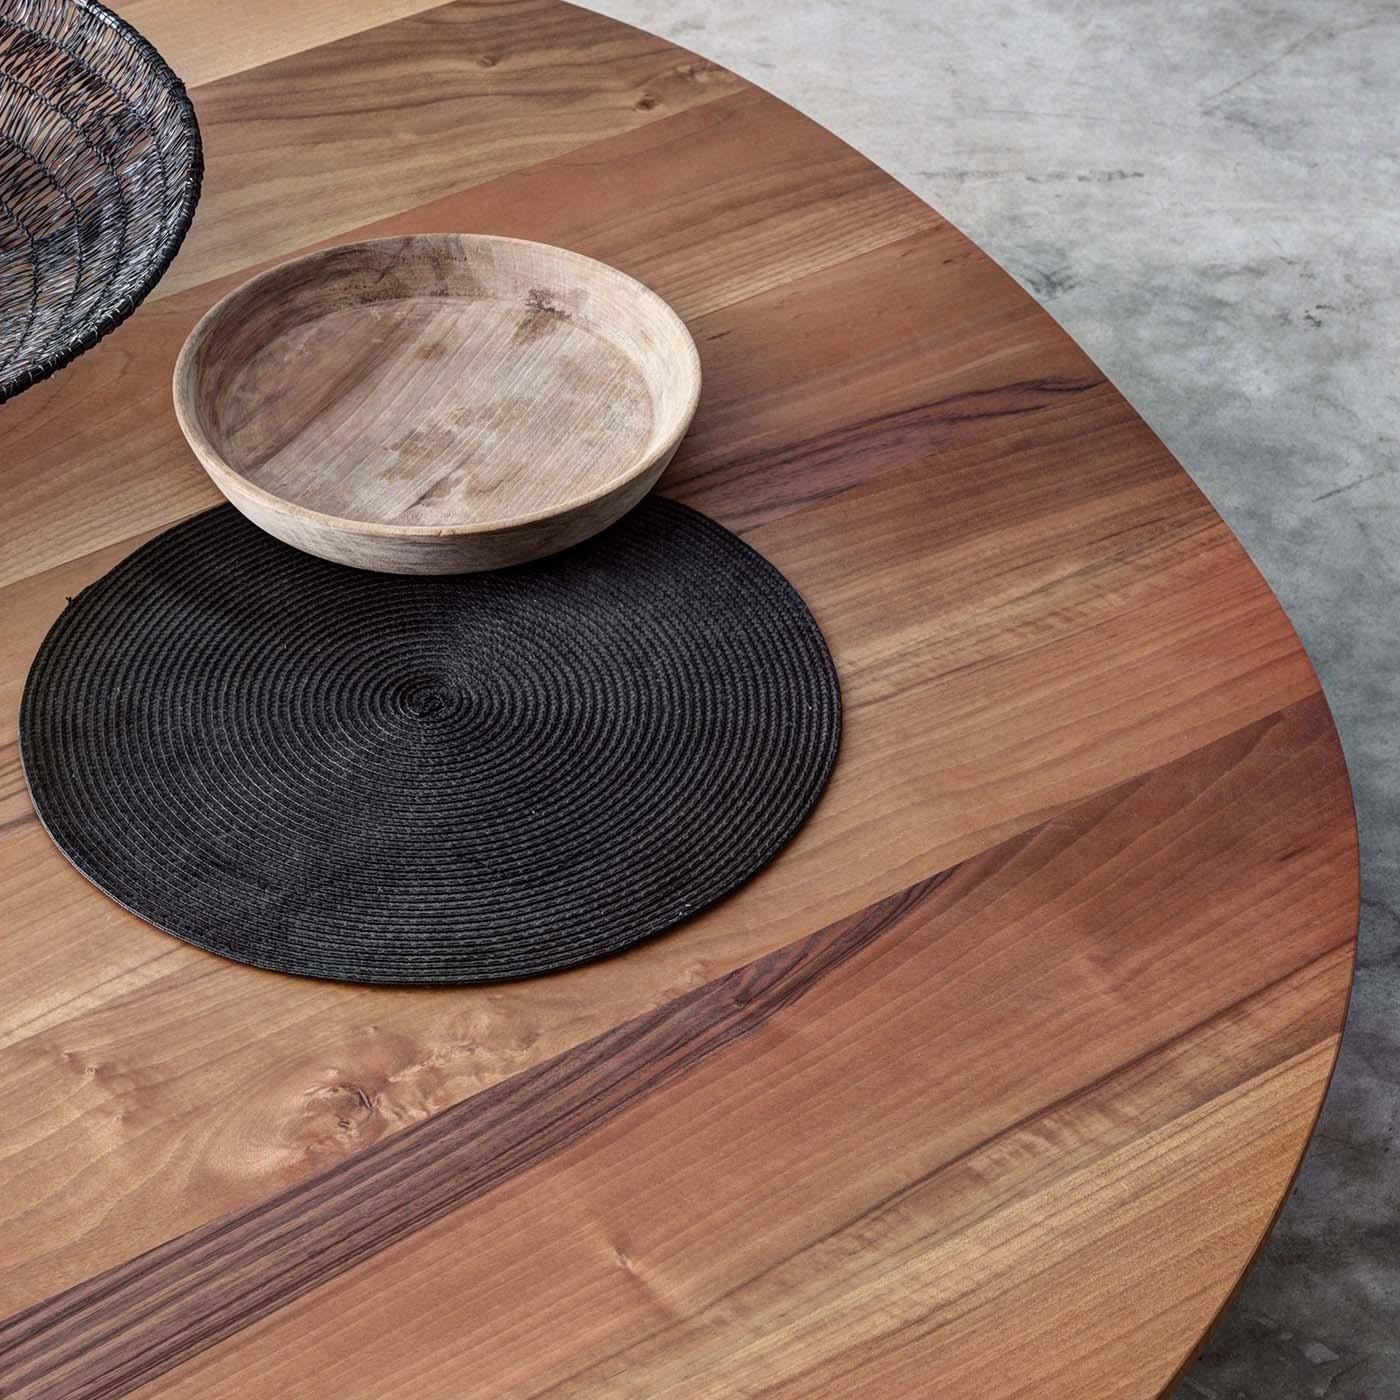 A magnificent addition to a modern living room, this coffee table was designed by Act_Romegialli. Its unique silhouette is enriched by the use of solid chestnut, whose warm hues and unique grain create the one-of-a-kind decoration of its top. Its